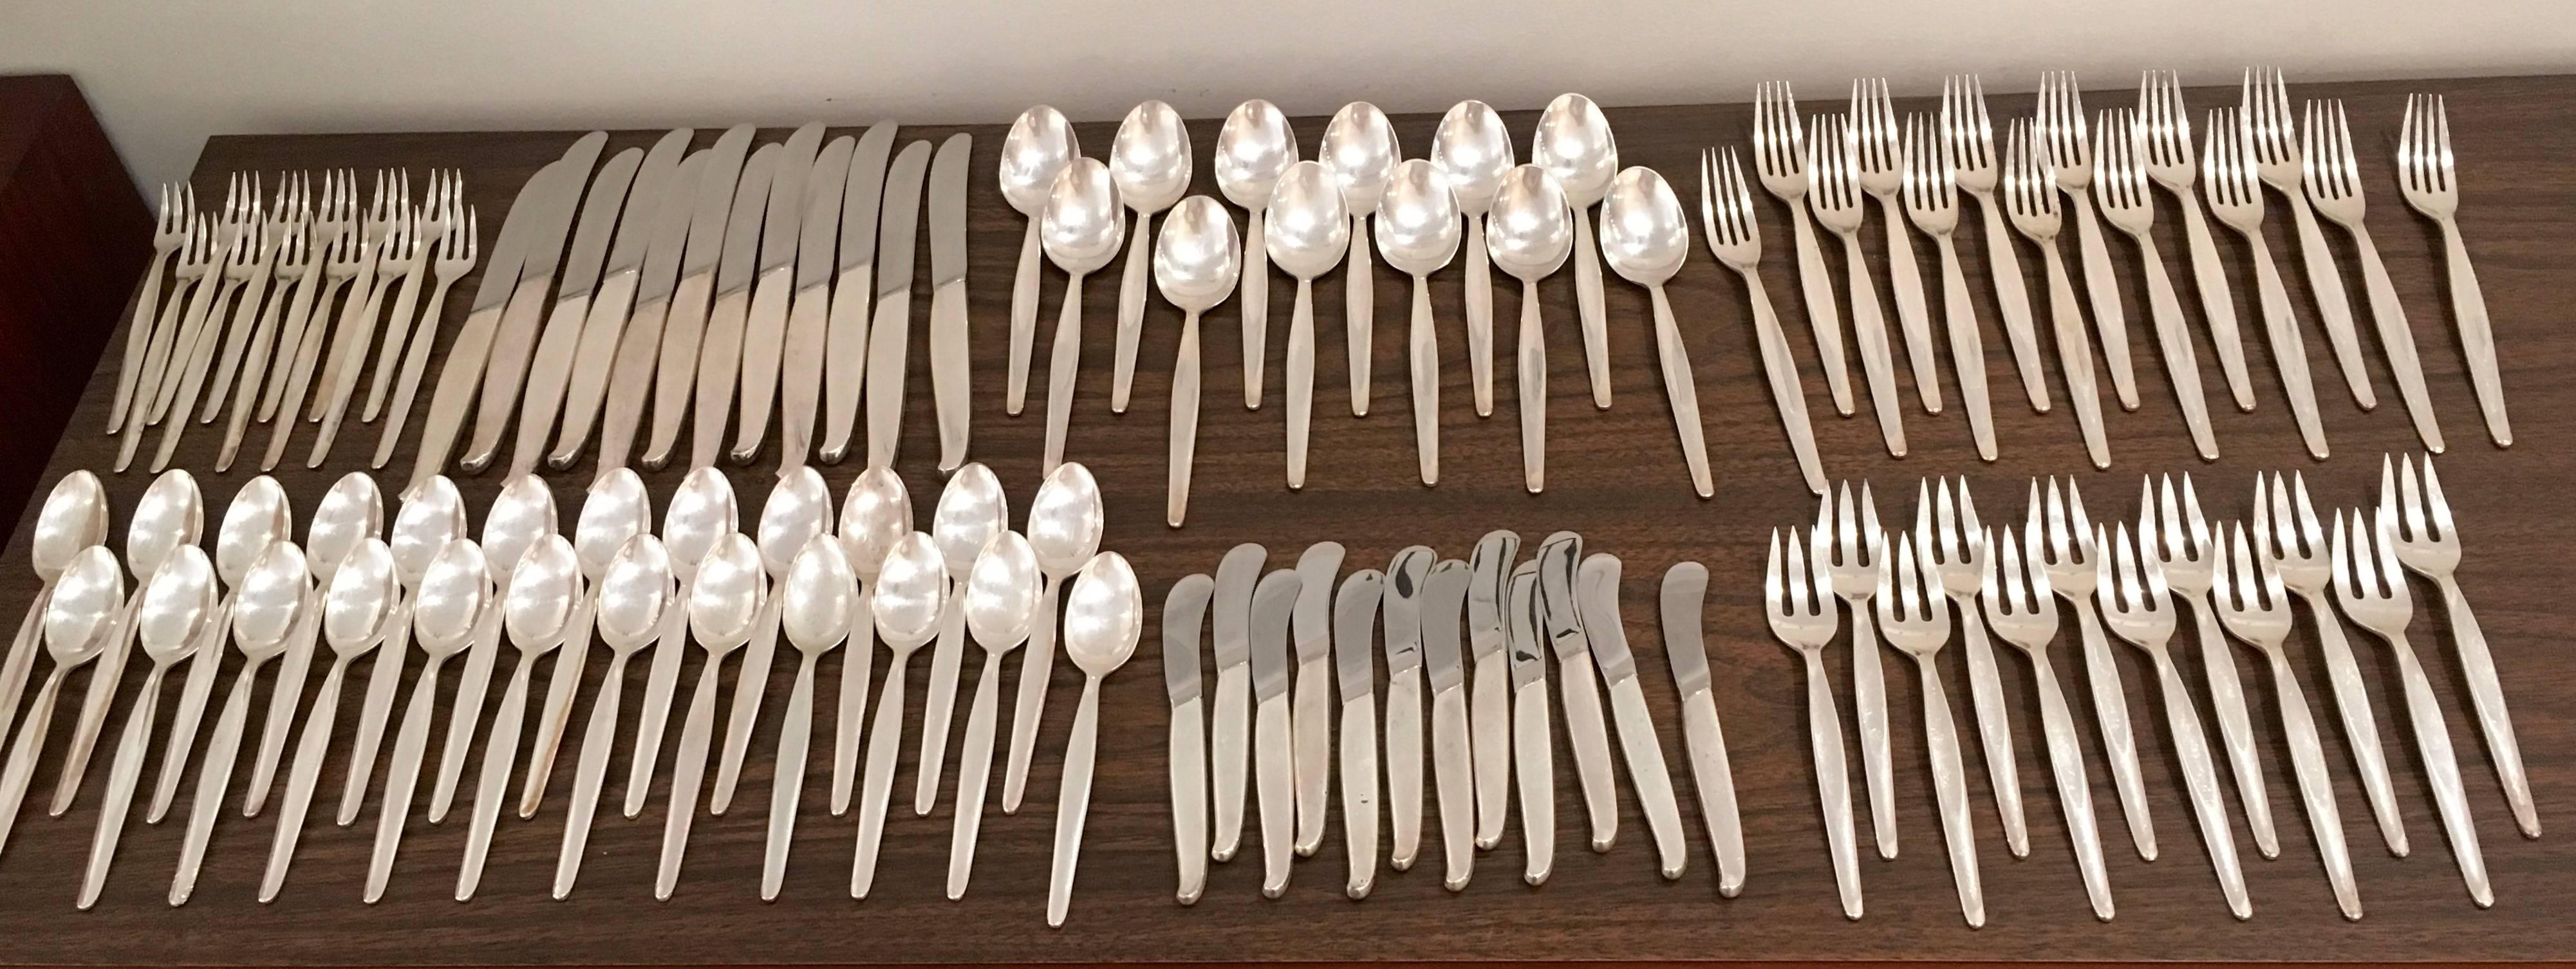 98 piece sterling silver flatware service designed by Robert J King, student of John Prip. This set includes:

12 knives, 8 3/4